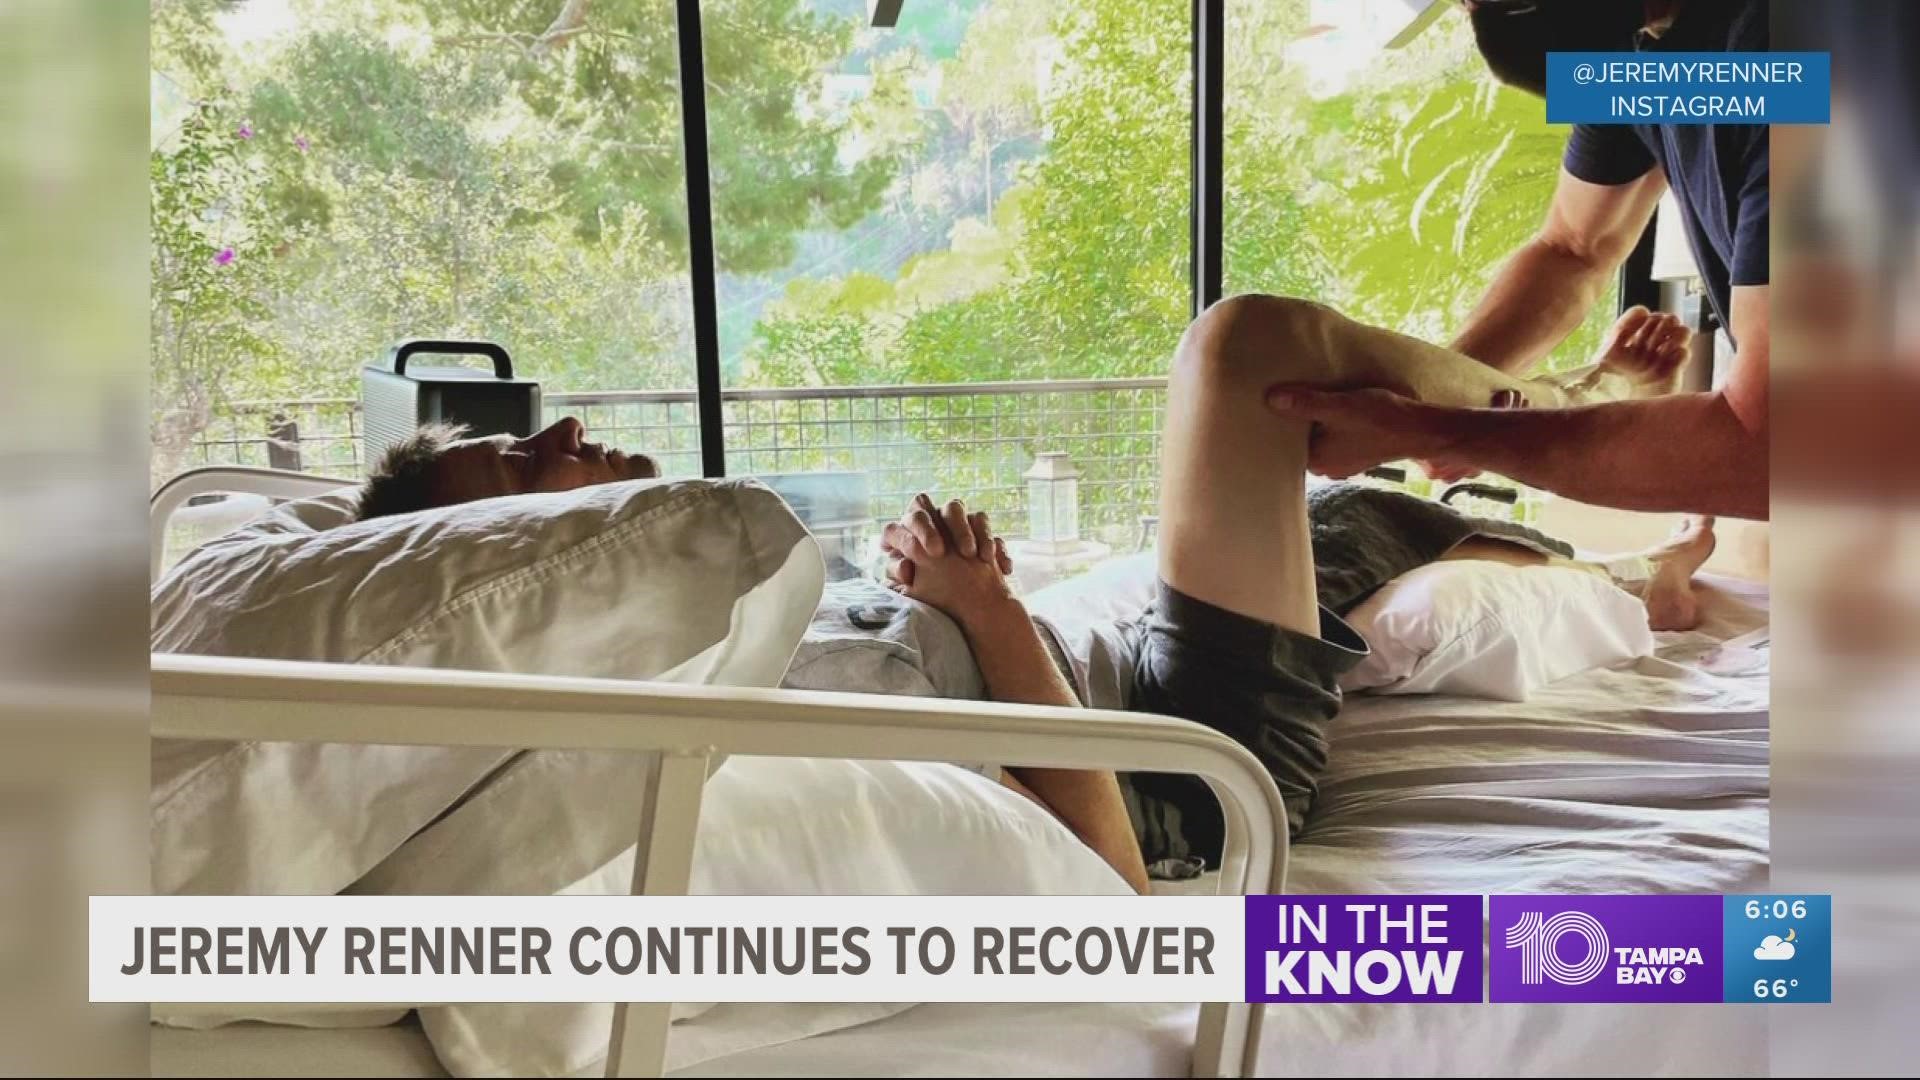 Renner spent more than two weeks in the hospital after being run over by his own 7-ton snow groomer.